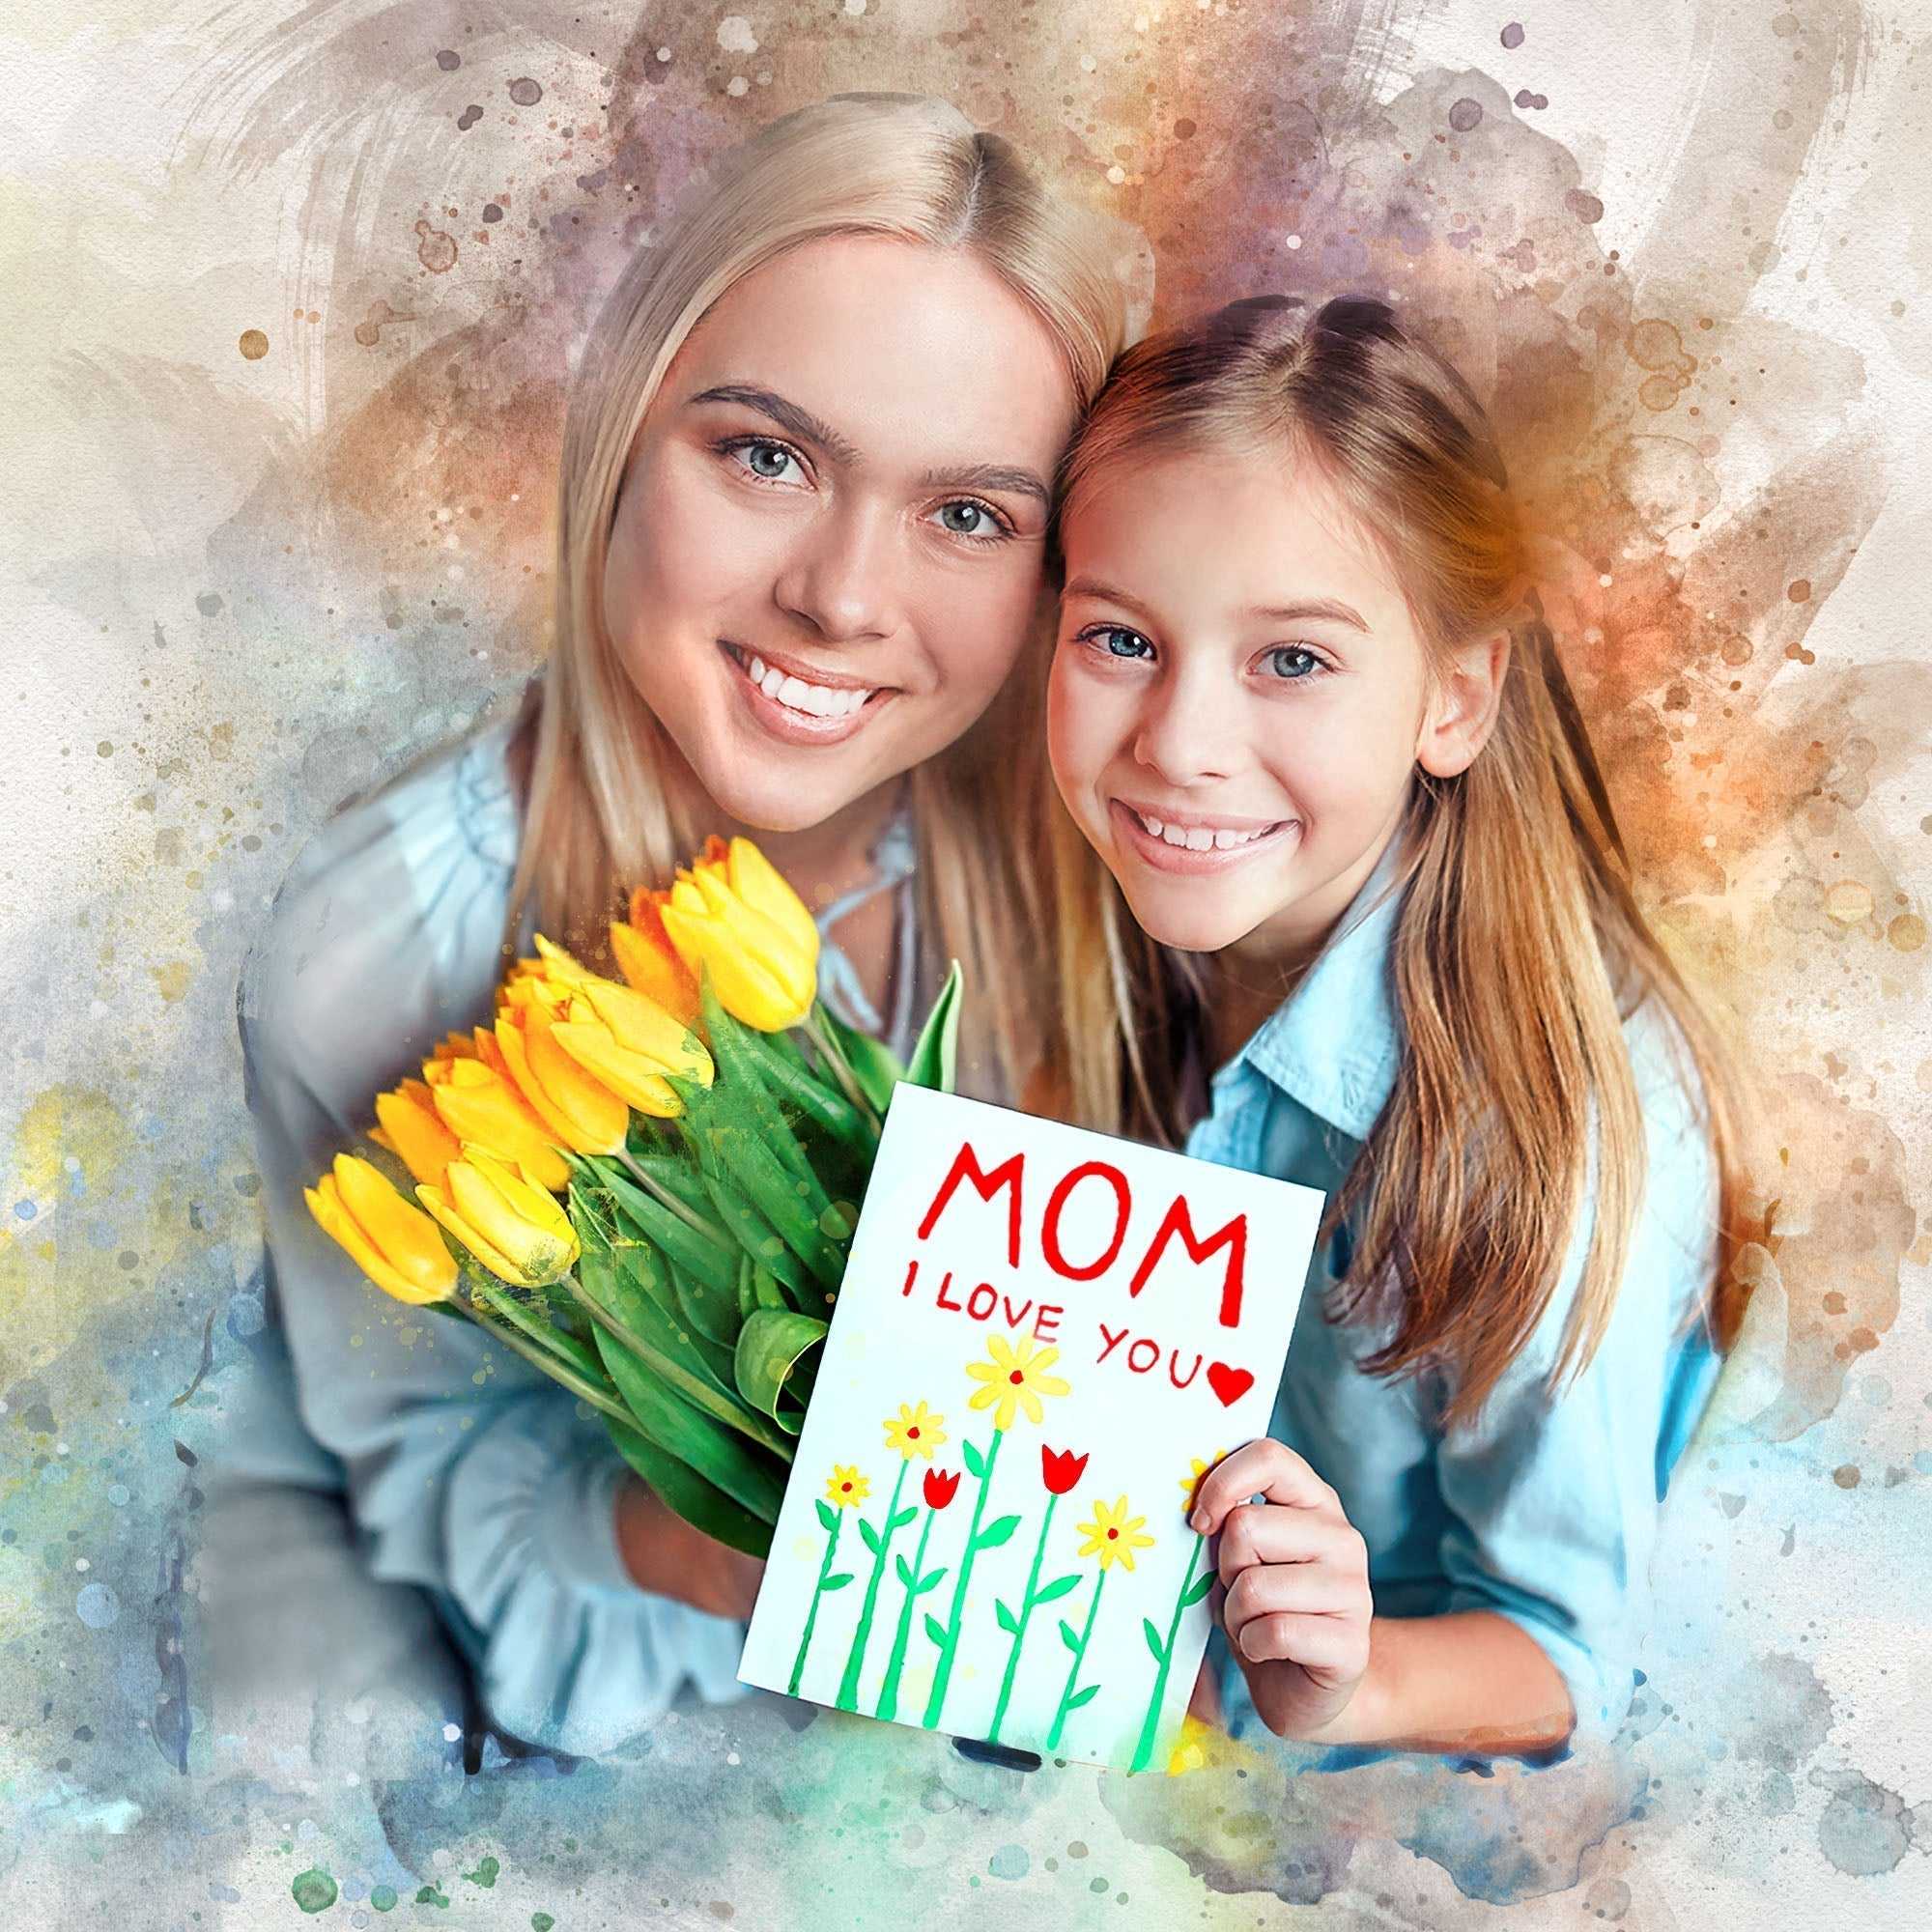 Mothers Day Gift from Husband | Custom Portrait Painting from Photo | Gift for Mother's Day - FromPicToArt